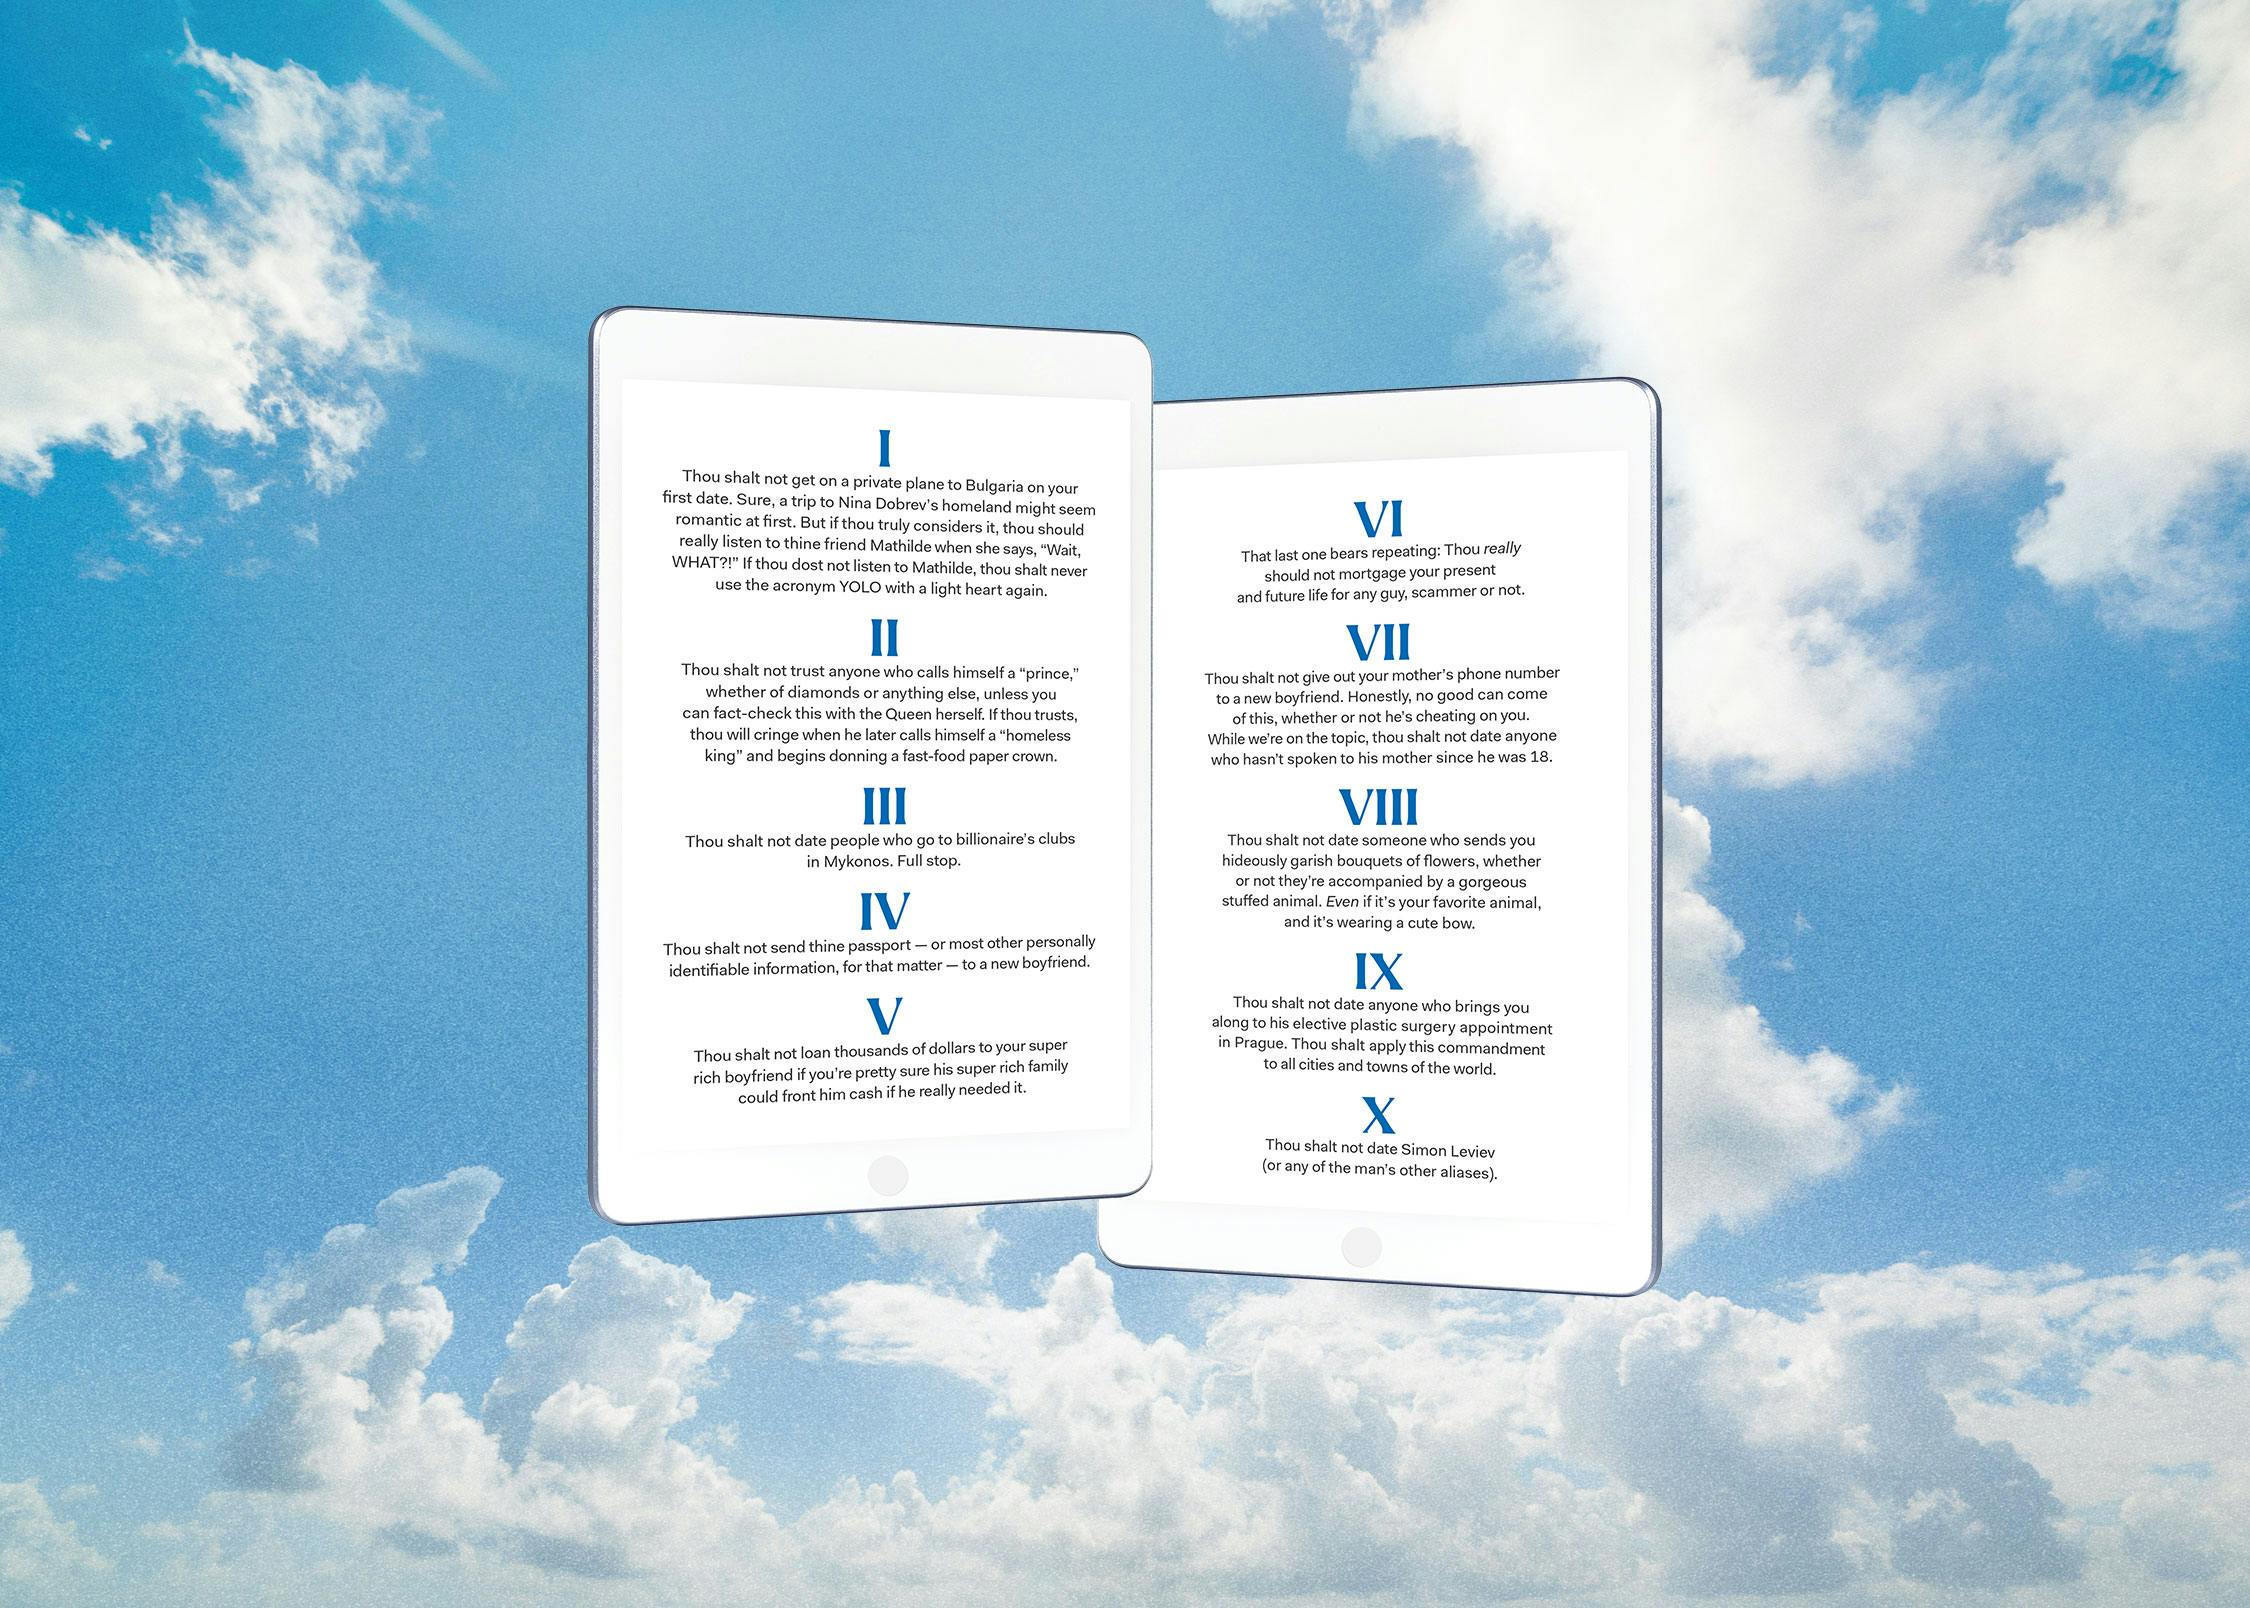 The Ten Commandments written in black and blue font against a blue sky with puffy white clouds.